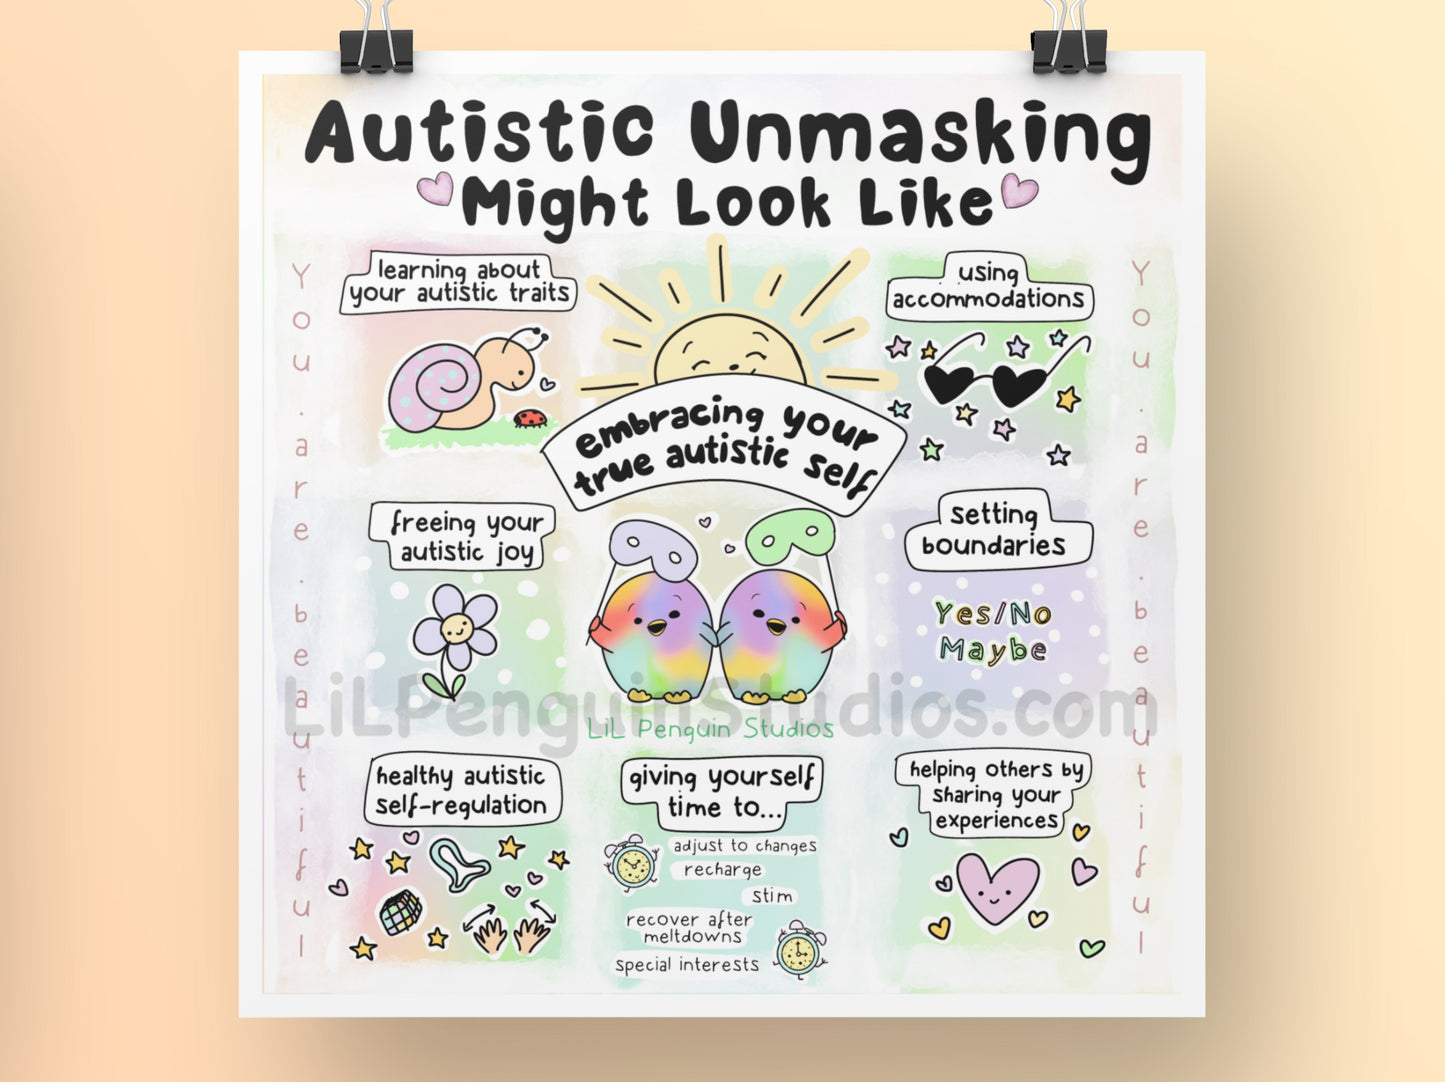 autistic unmasking digital printable art print about embracing your true autistic self.